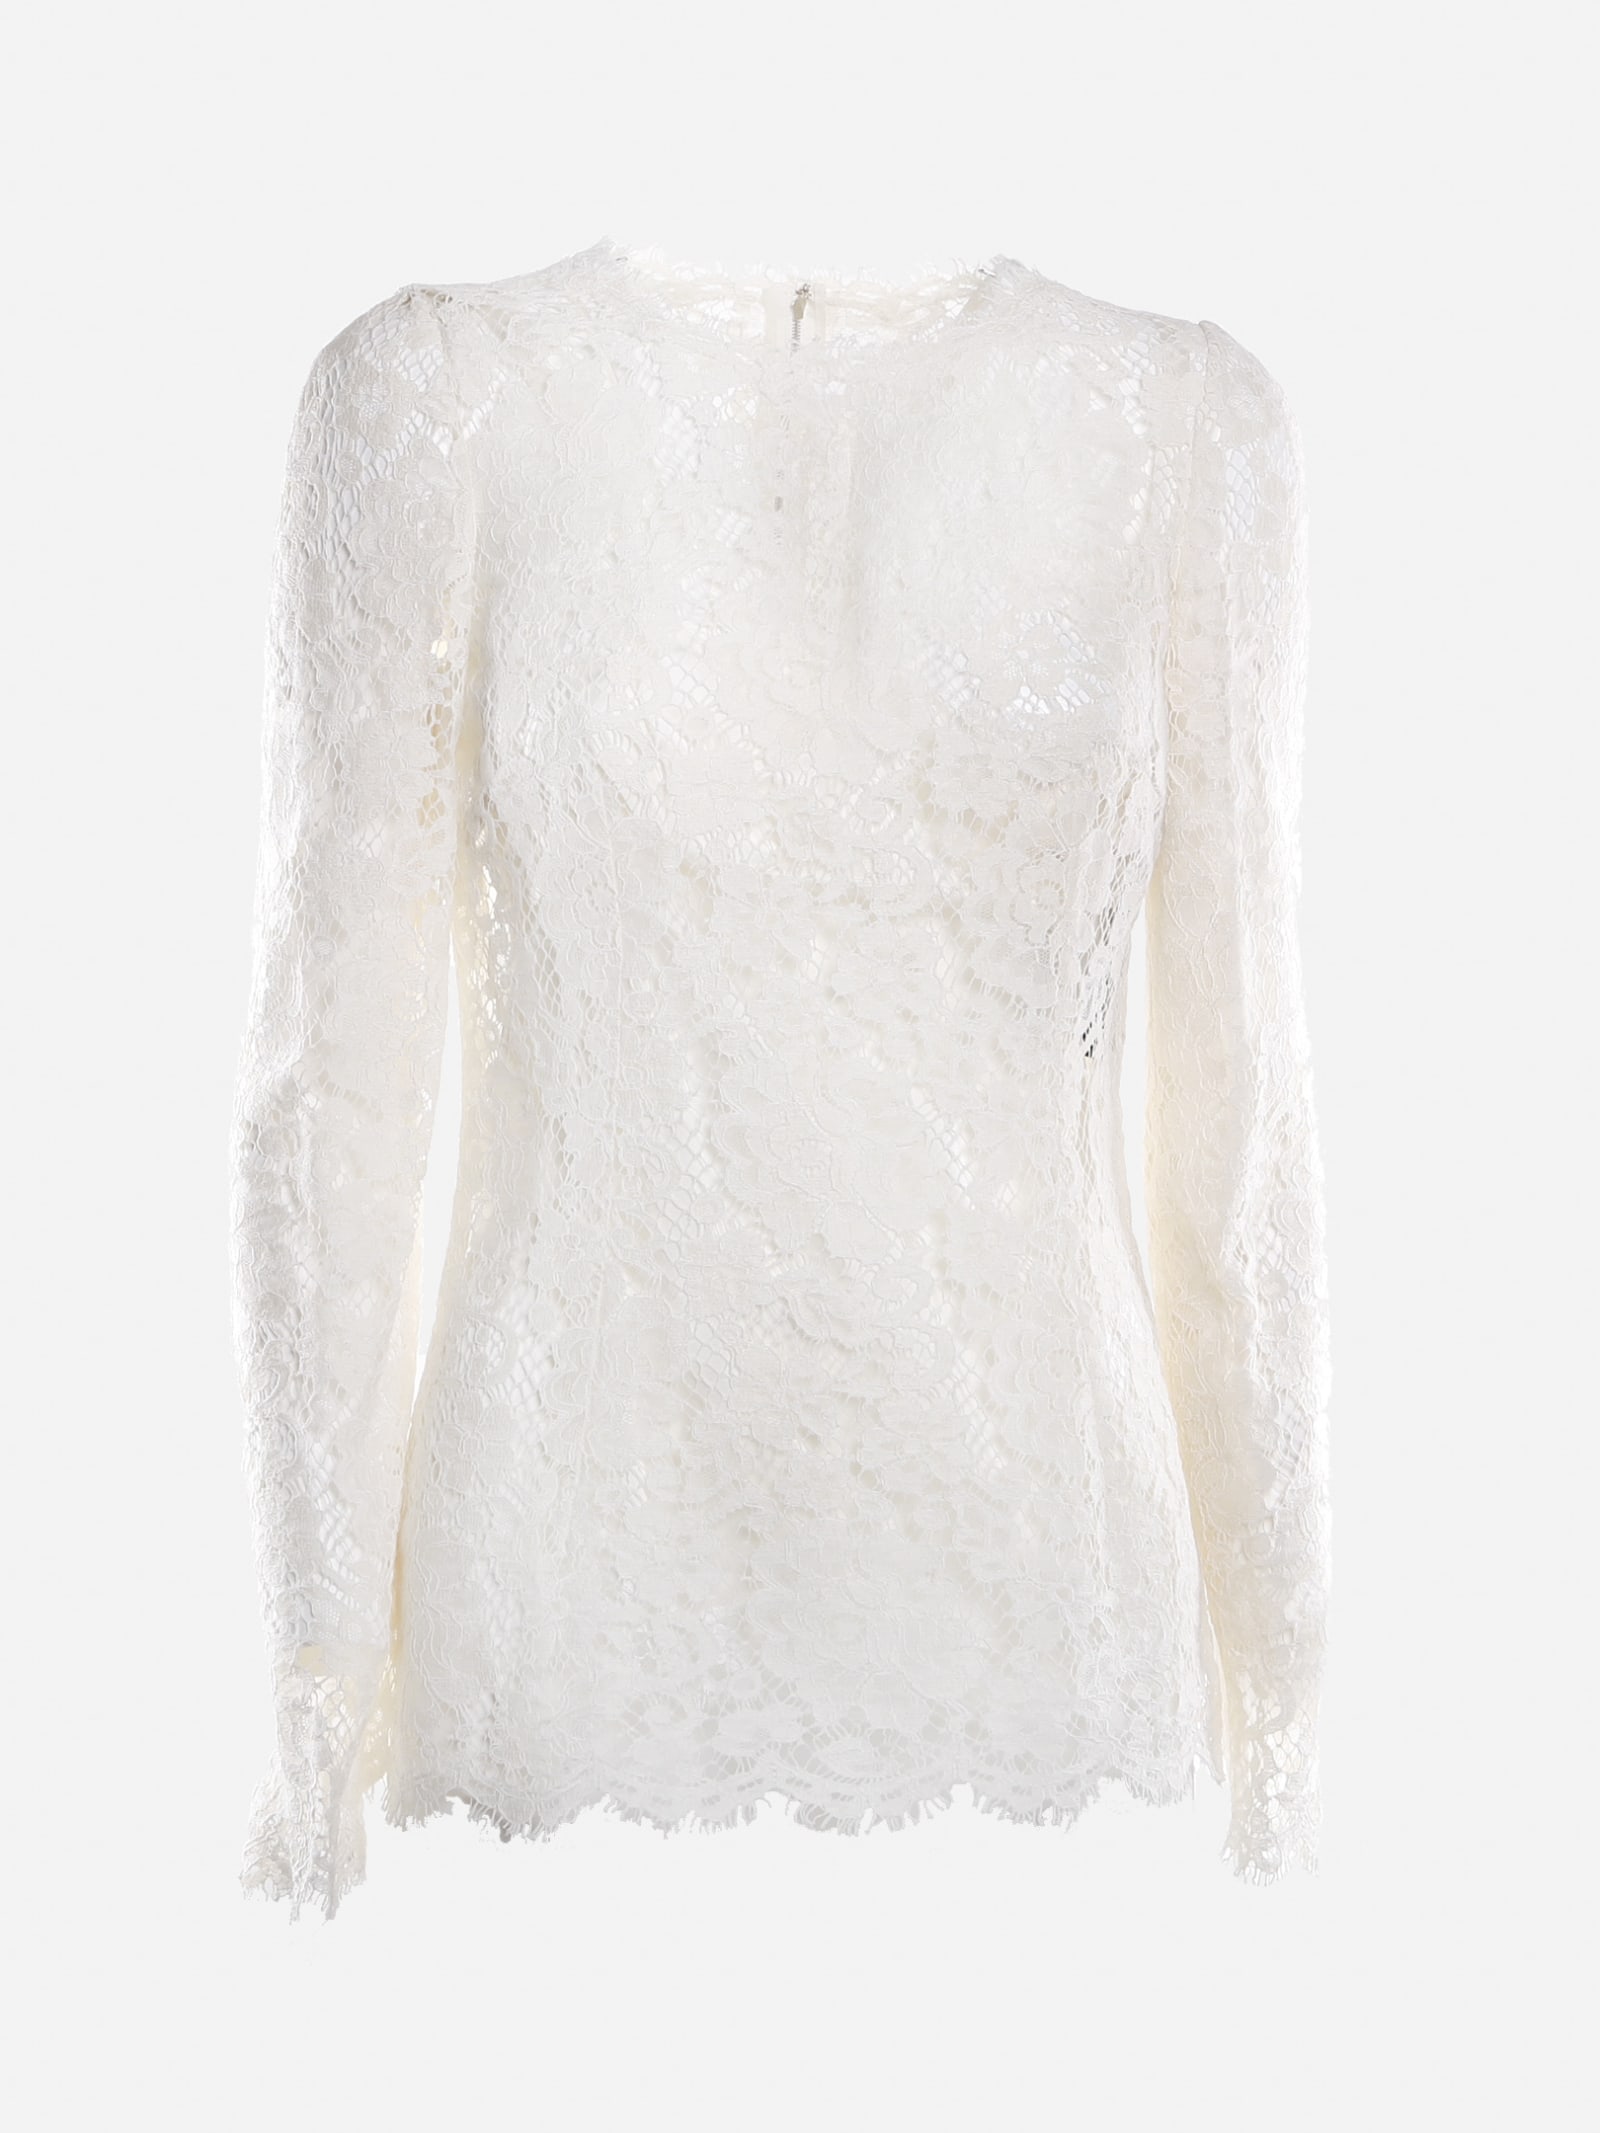 Dolce & Gabbana Floral Lace Top In Cotton Blend